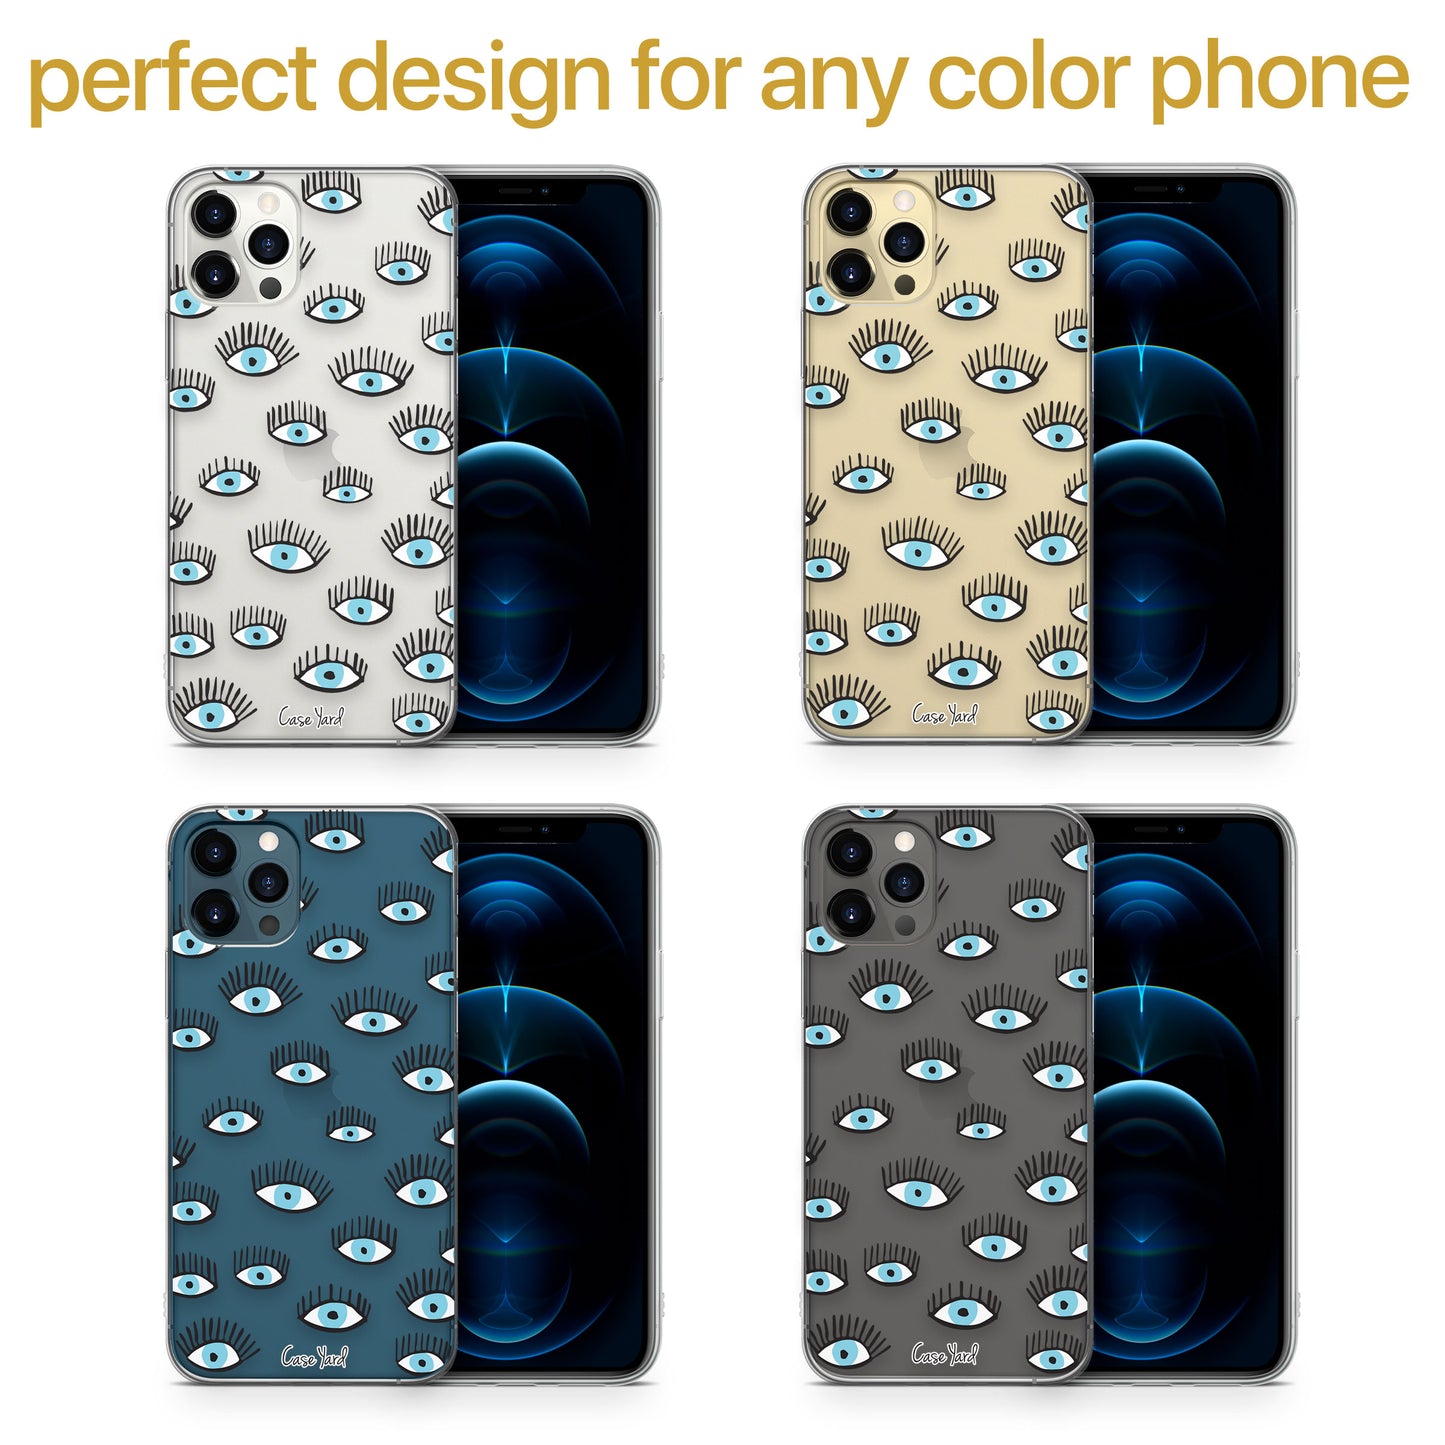 TPU Clear case with (All Seeing Eyes) Design for iPhone & Samsung Phones